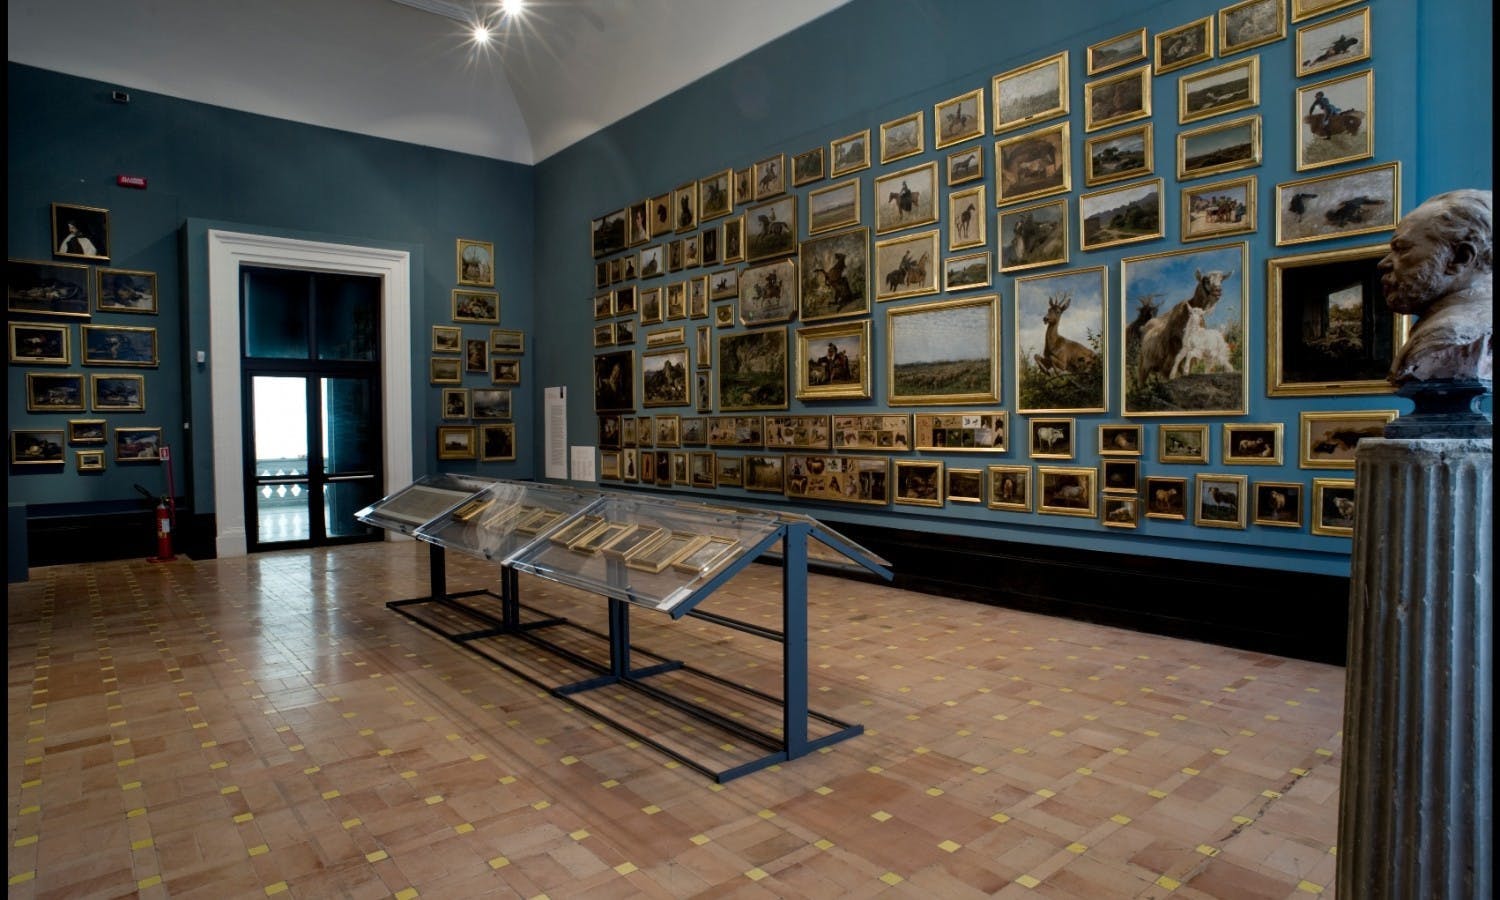 Accademia Gallery: Skip the Line Tickets